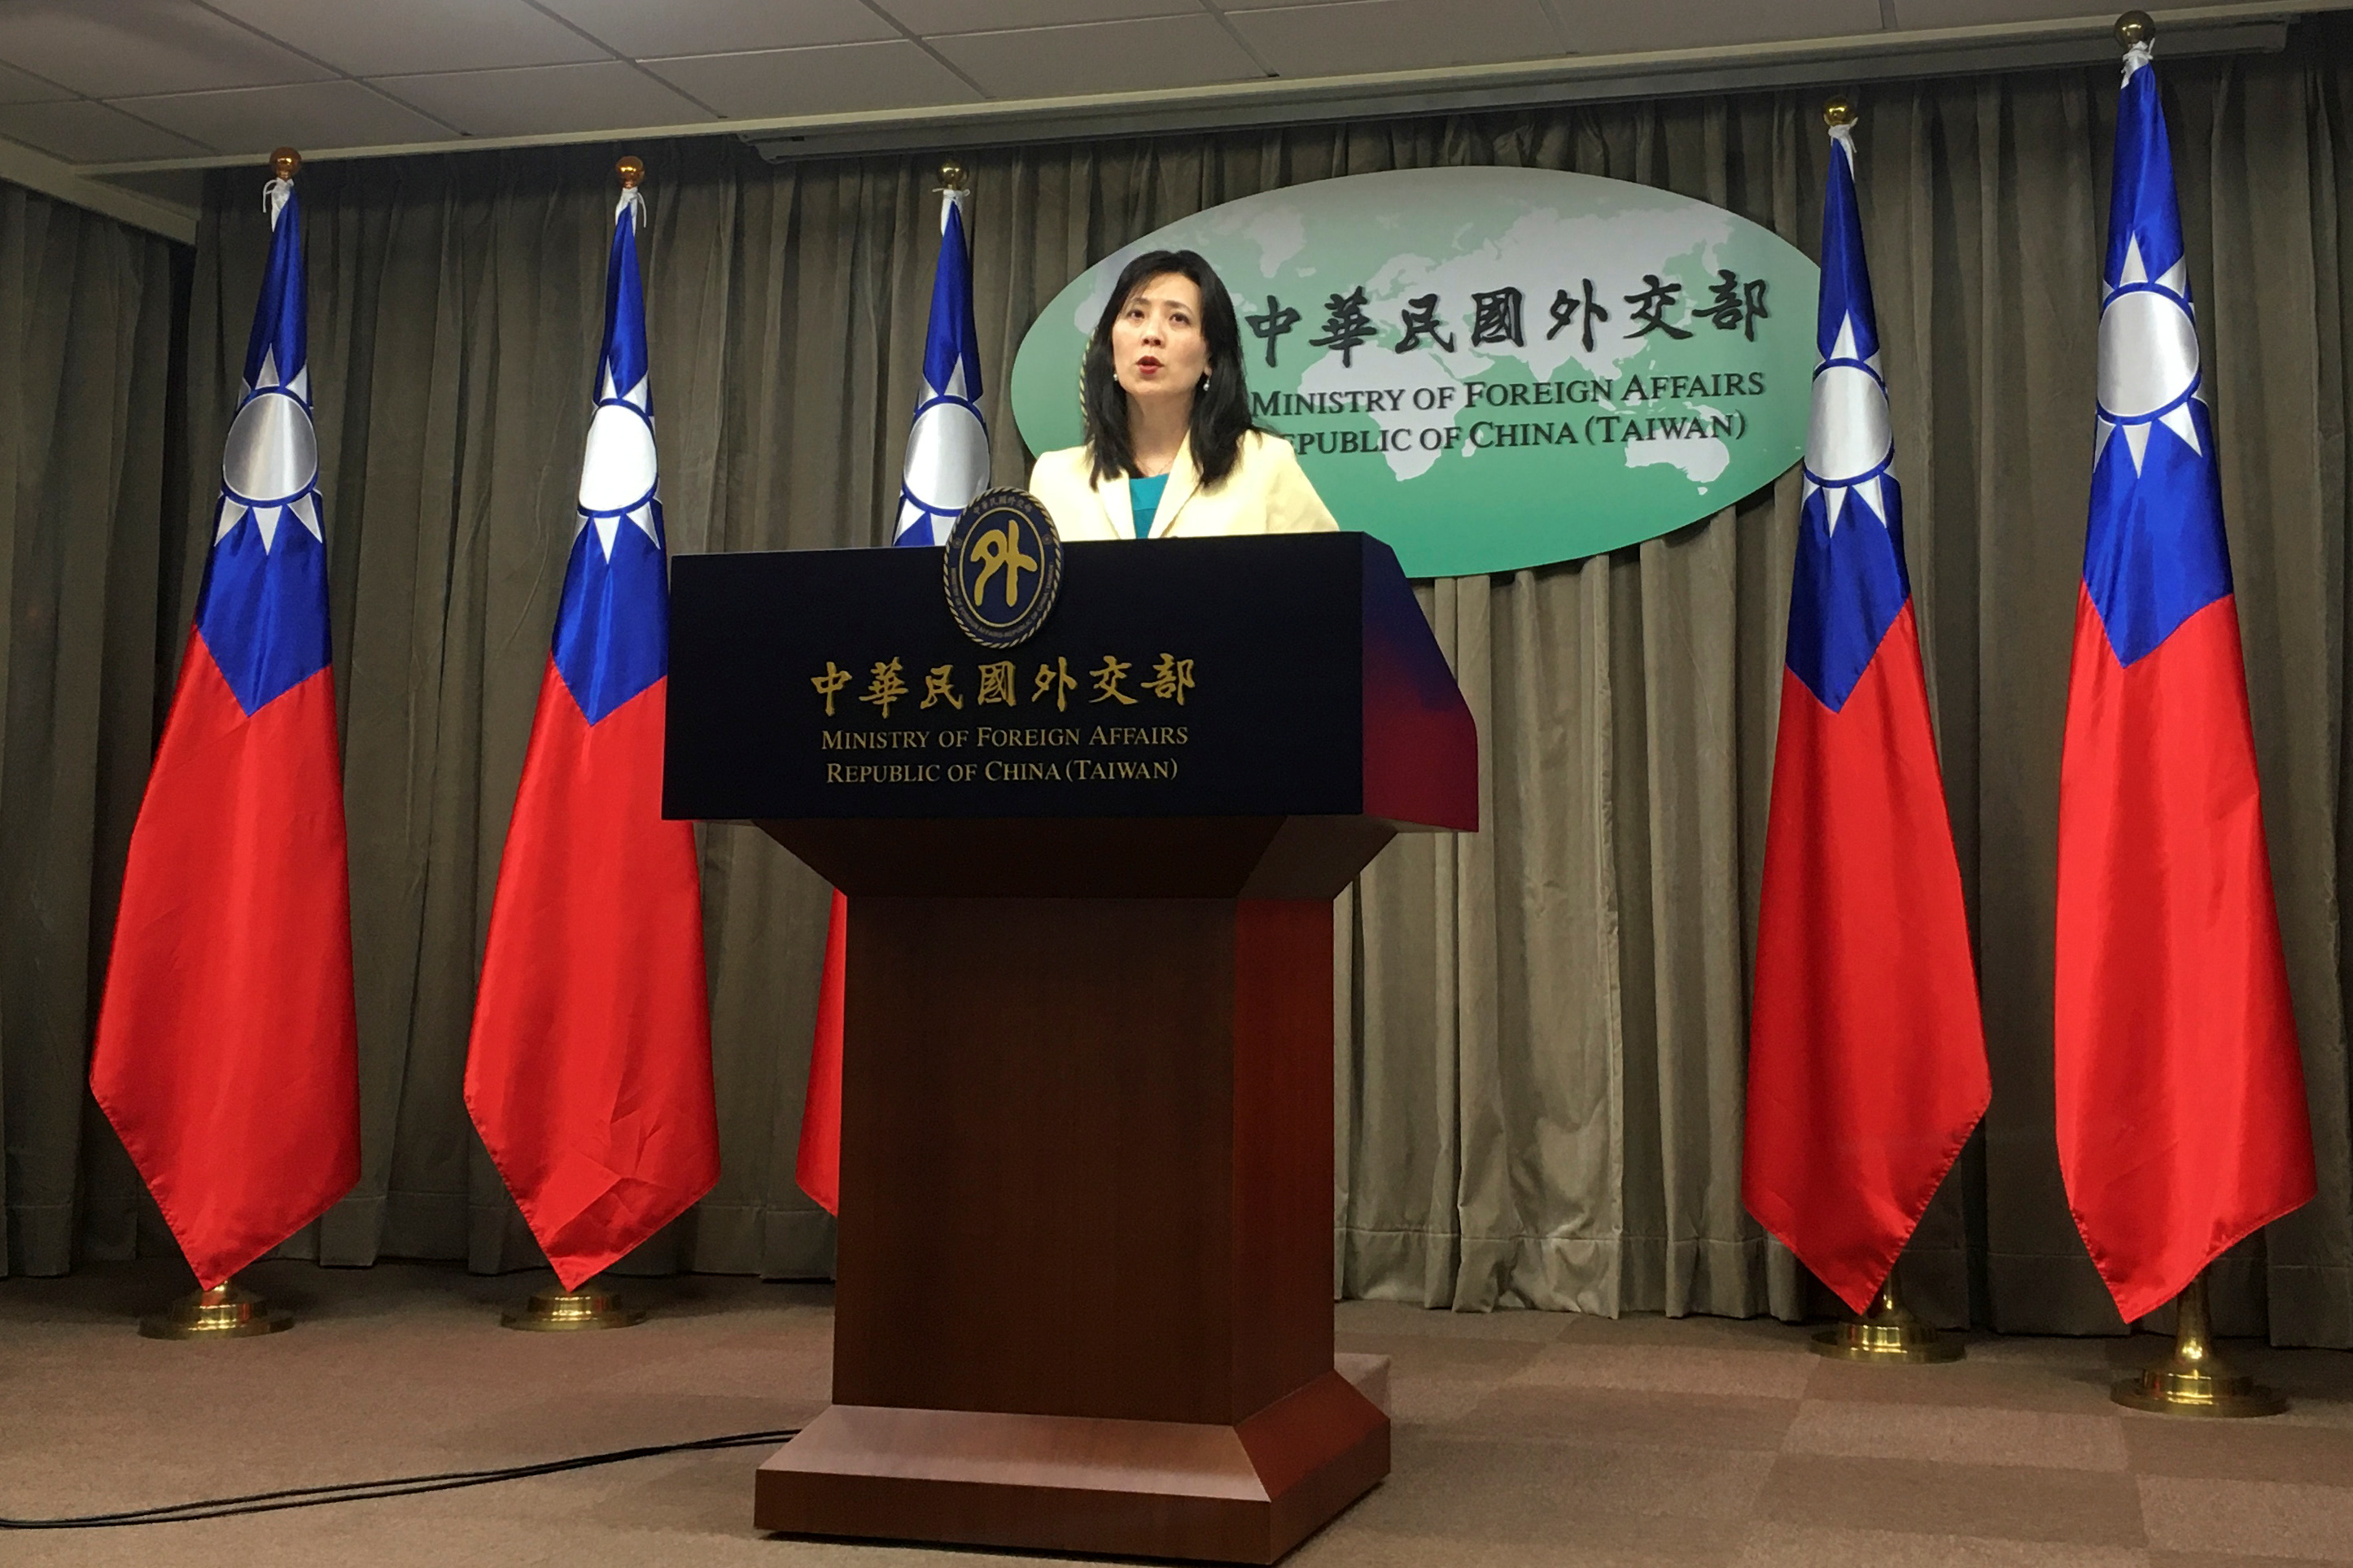 Taiwan Foreign Ministry Spokeswoman Joanne Ou speaks at a news conference in Taipei